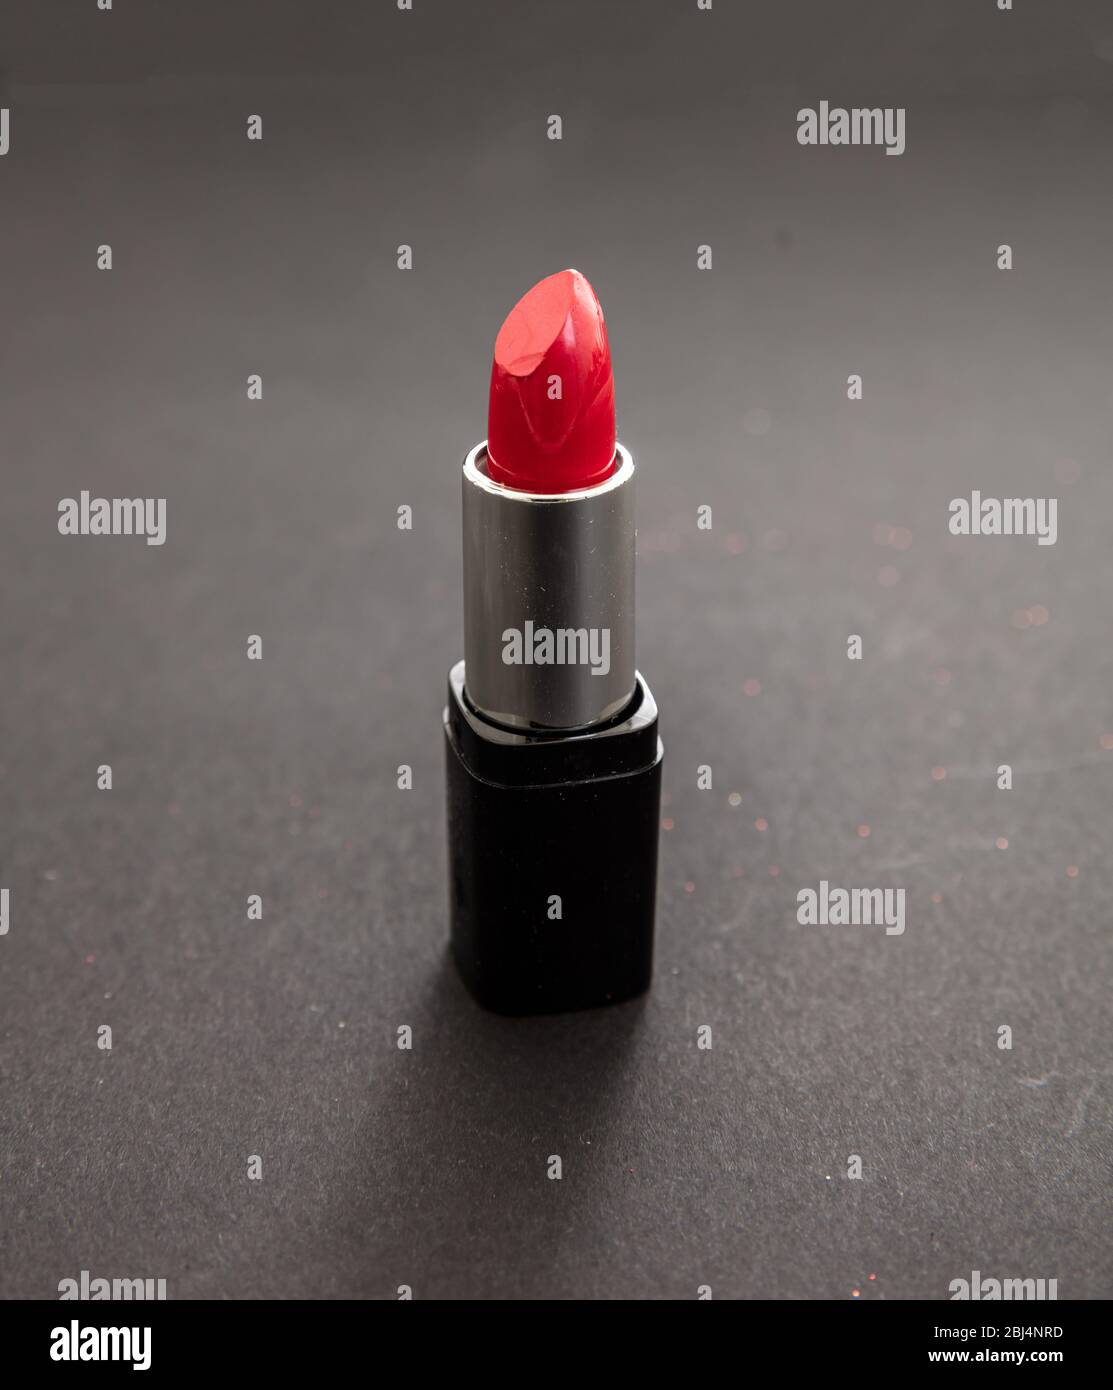 Lipstick red color against black background, closeup view. Bright red lip gloss, cosmetics, makeup concept Stock Photo